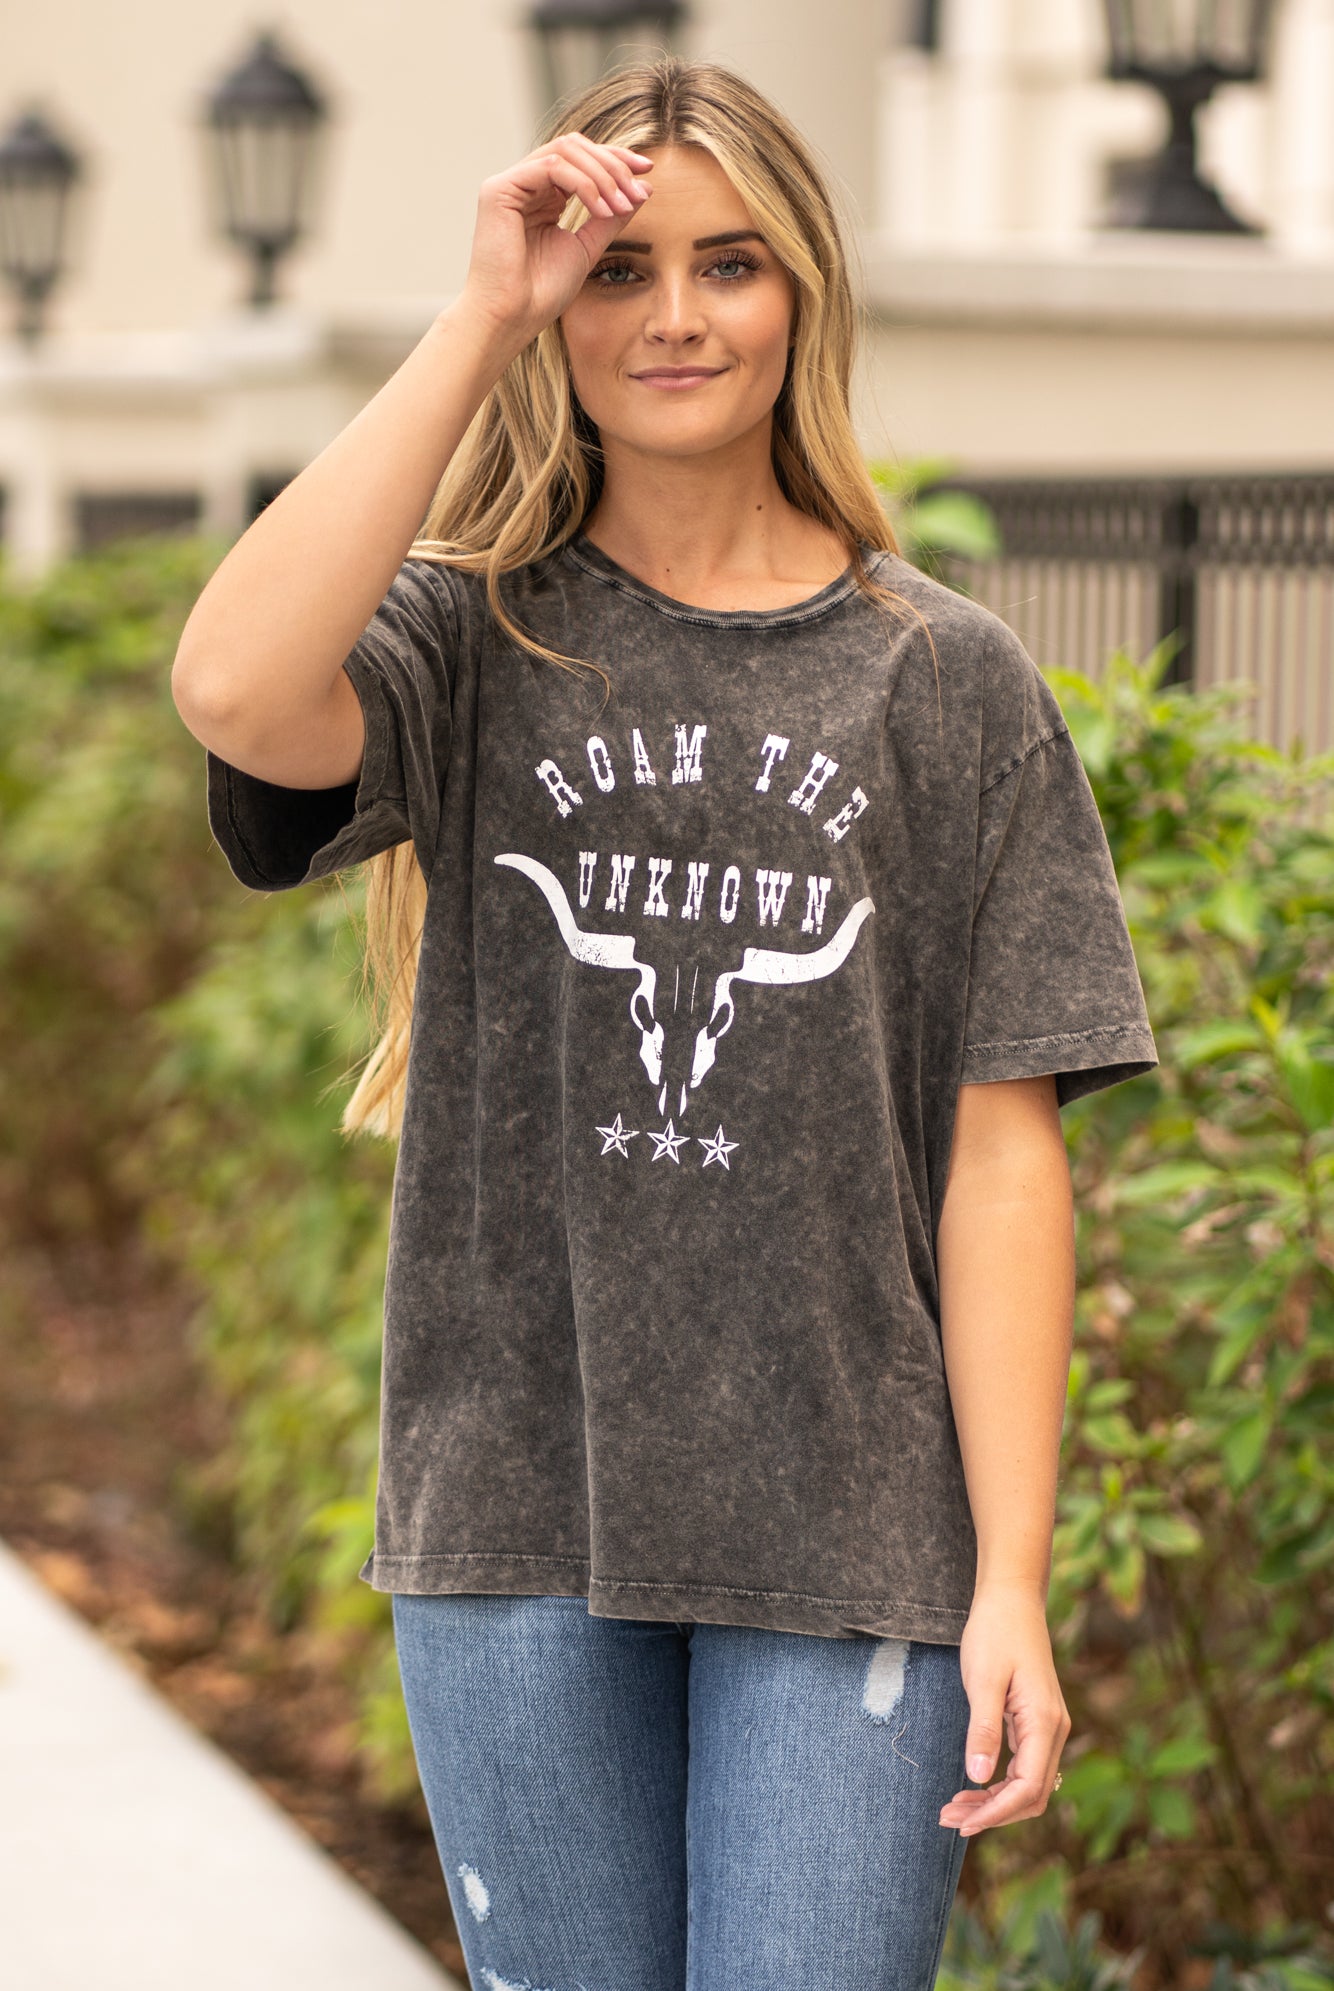 Zutter  Color: Black Neckline: Round Sleeve: Short Sleeve Distressed, Oversized tee  Material: COTTON 100% Style #: K7777-1520 Contact us for any additional measurements or sizing